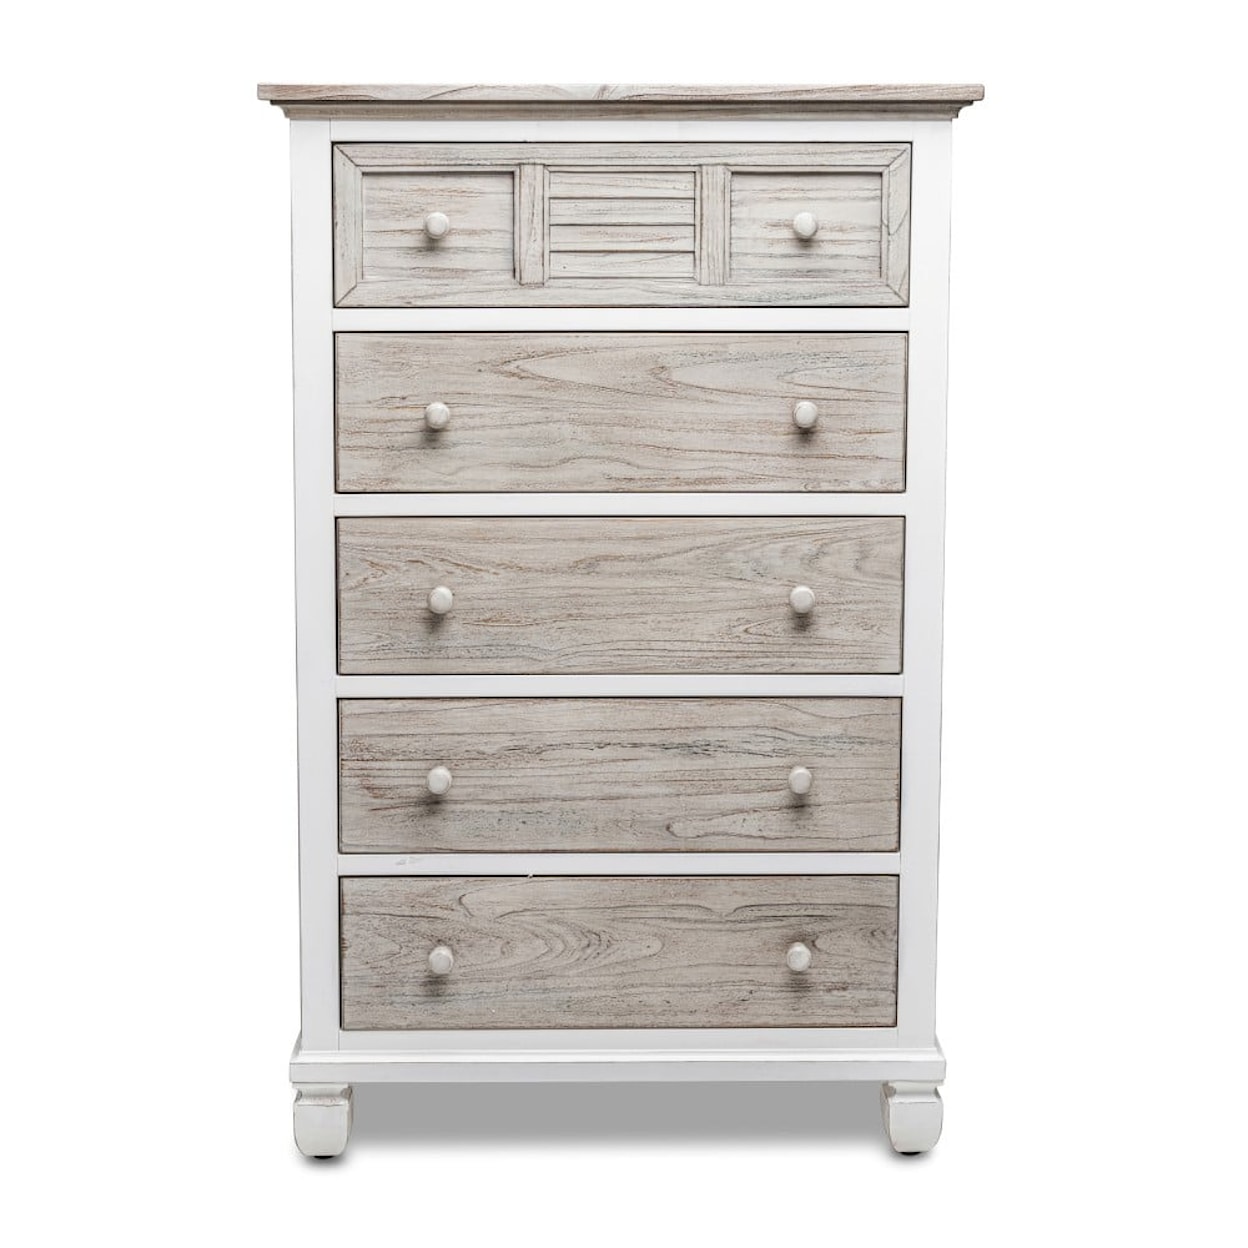 Sea Winds Trading Company Islamorada Bedroom Collection Bedroom Drawer Chest